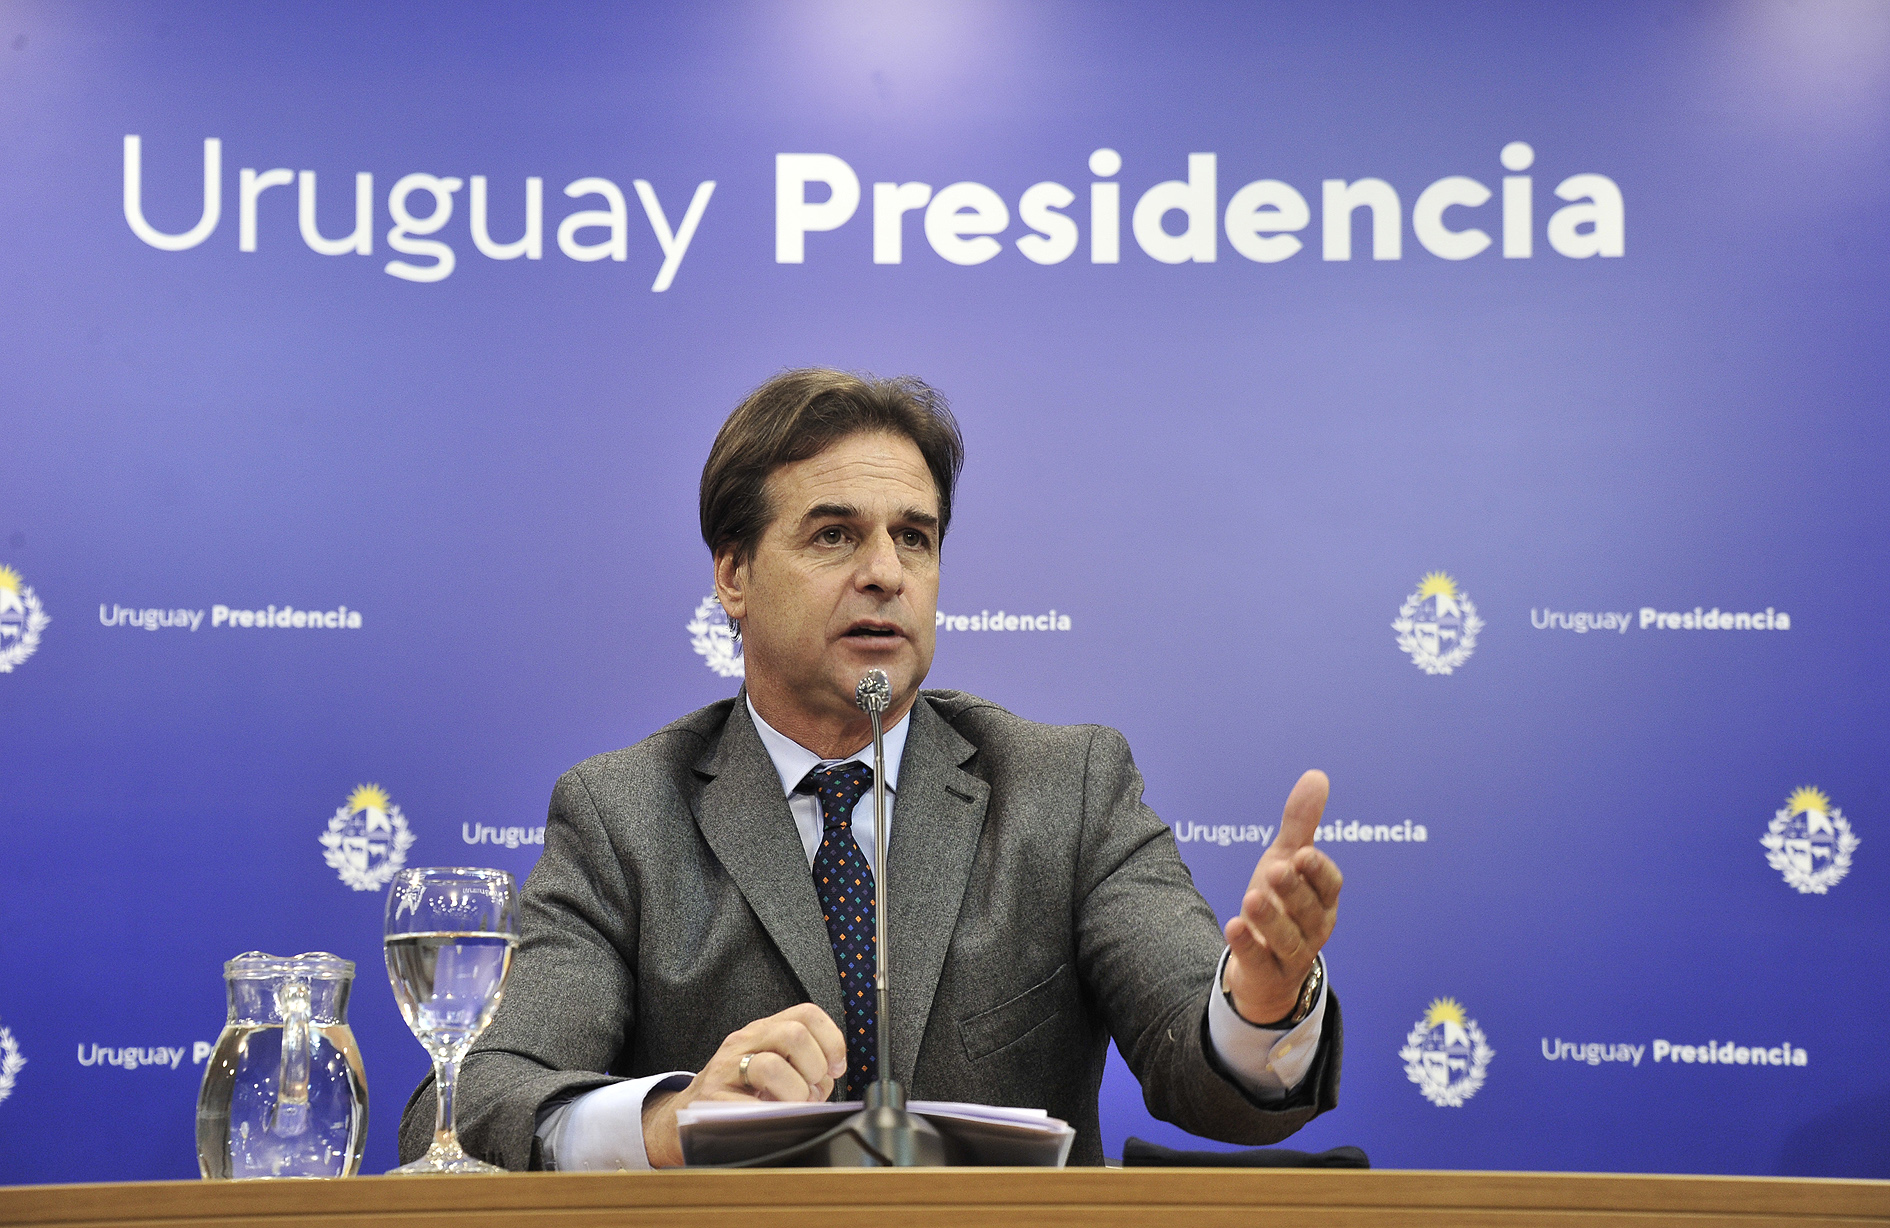 Lacalle Pou, President of Uruguay, speaks at a press conference.